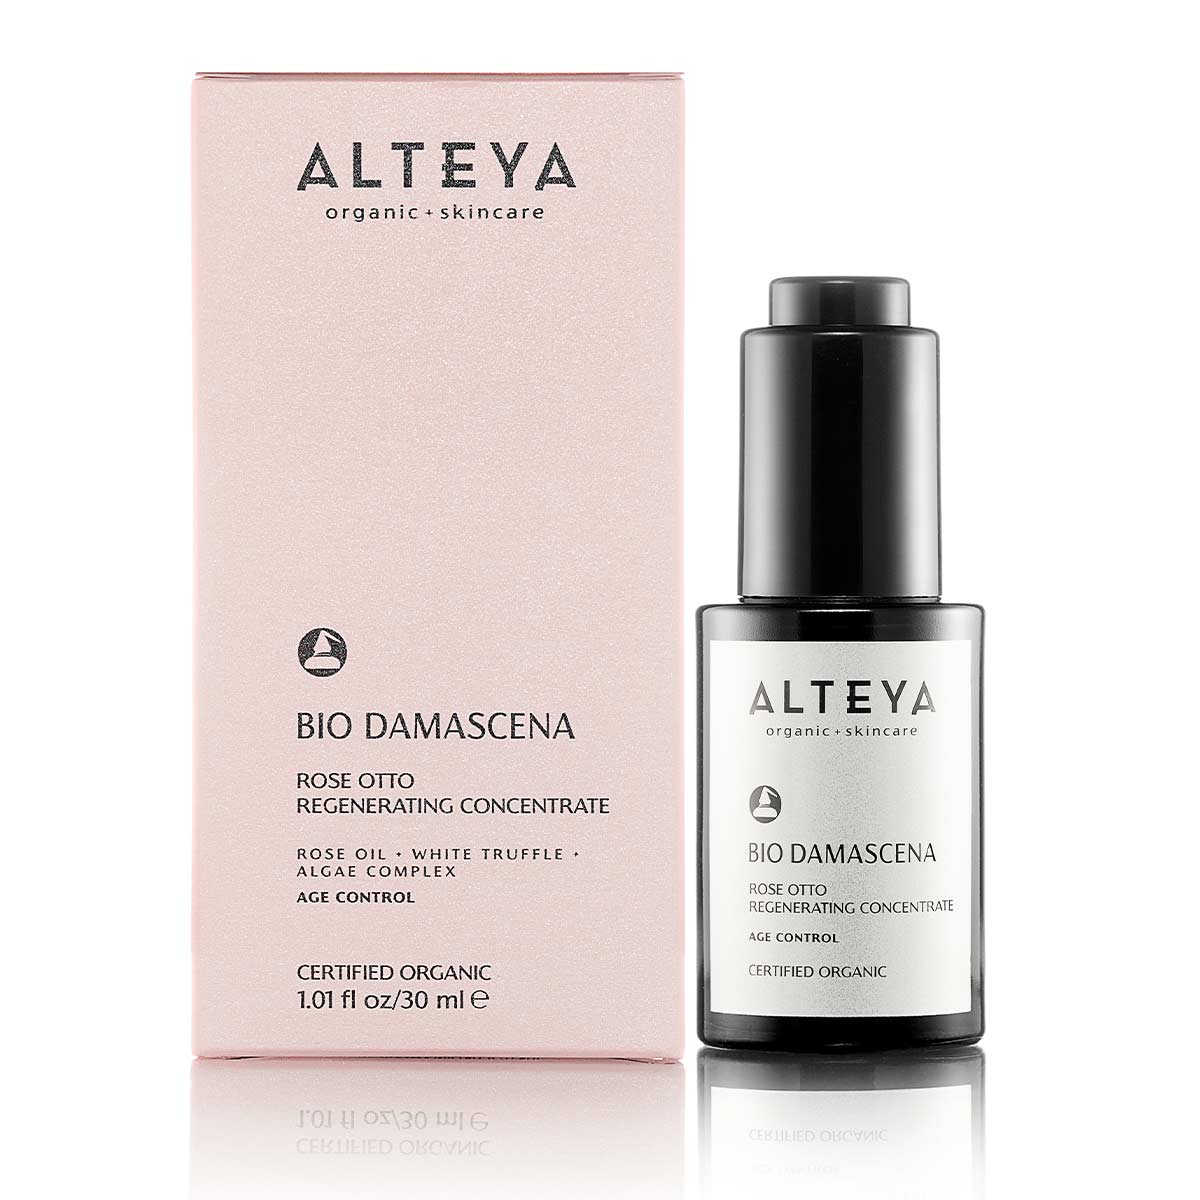 This High-Performance Regenerating Serum deploys its youth-enhancing effectiveness with visible results to naked eyes, in less than 15 minutes after first use. It helps repair skin’s moisture barrier, reduces the appearance of wrinkles and improves luminosity, day after day, reaching optimal effectiveness in 30 days of use.